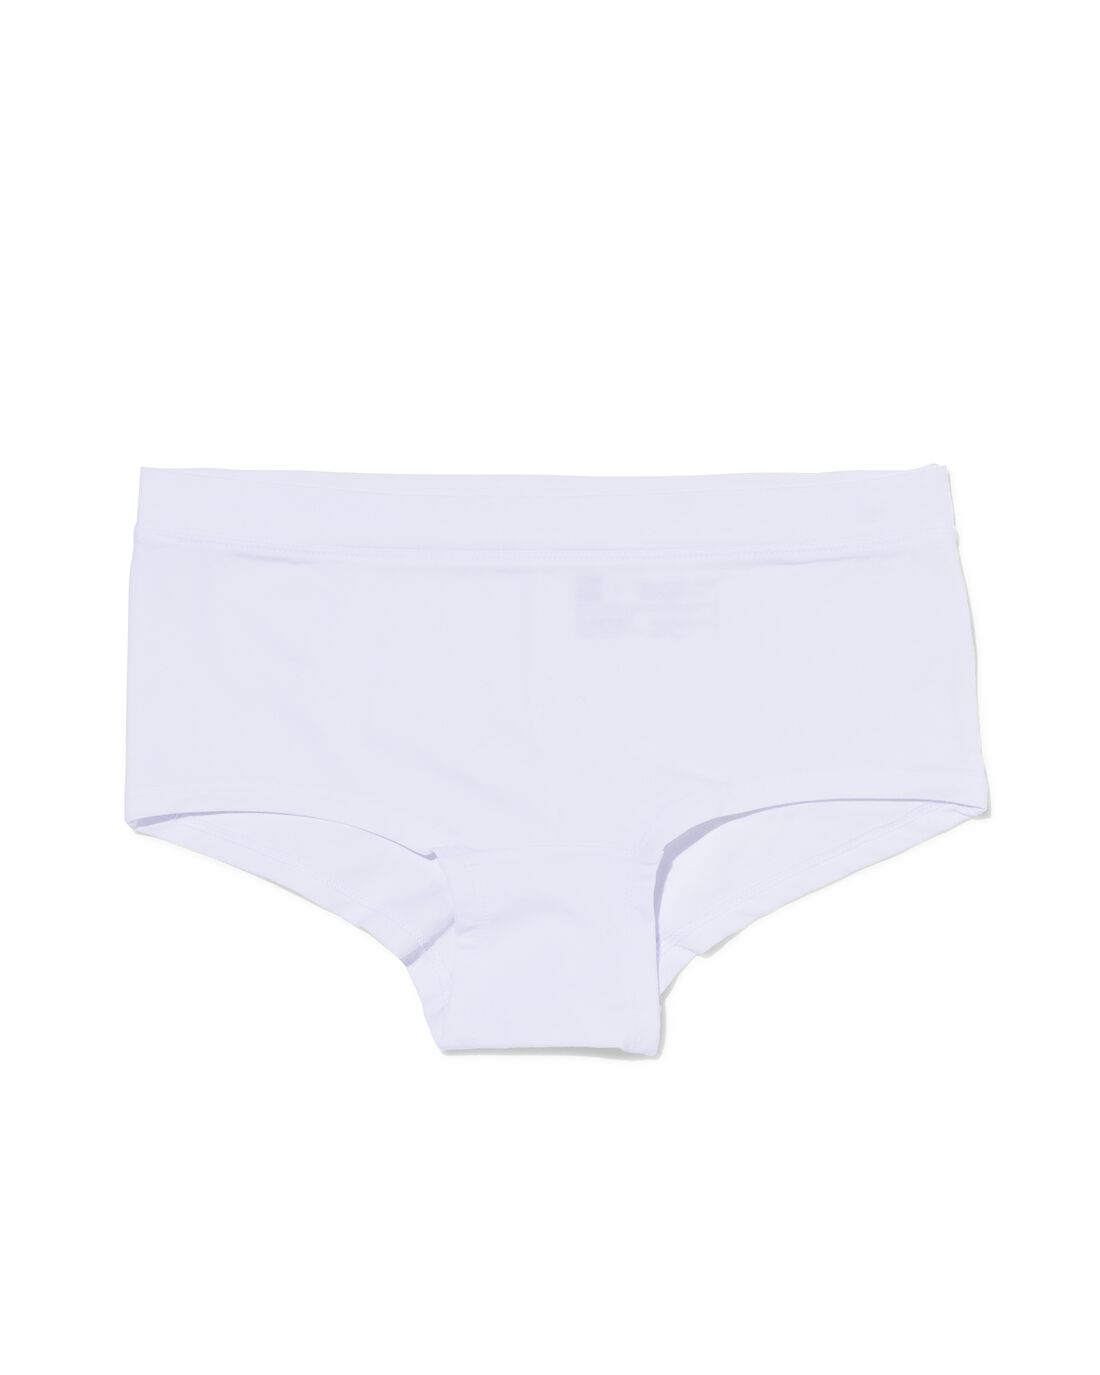 HEMA Damesboxer Real Lasting Cotton Wit (wit)